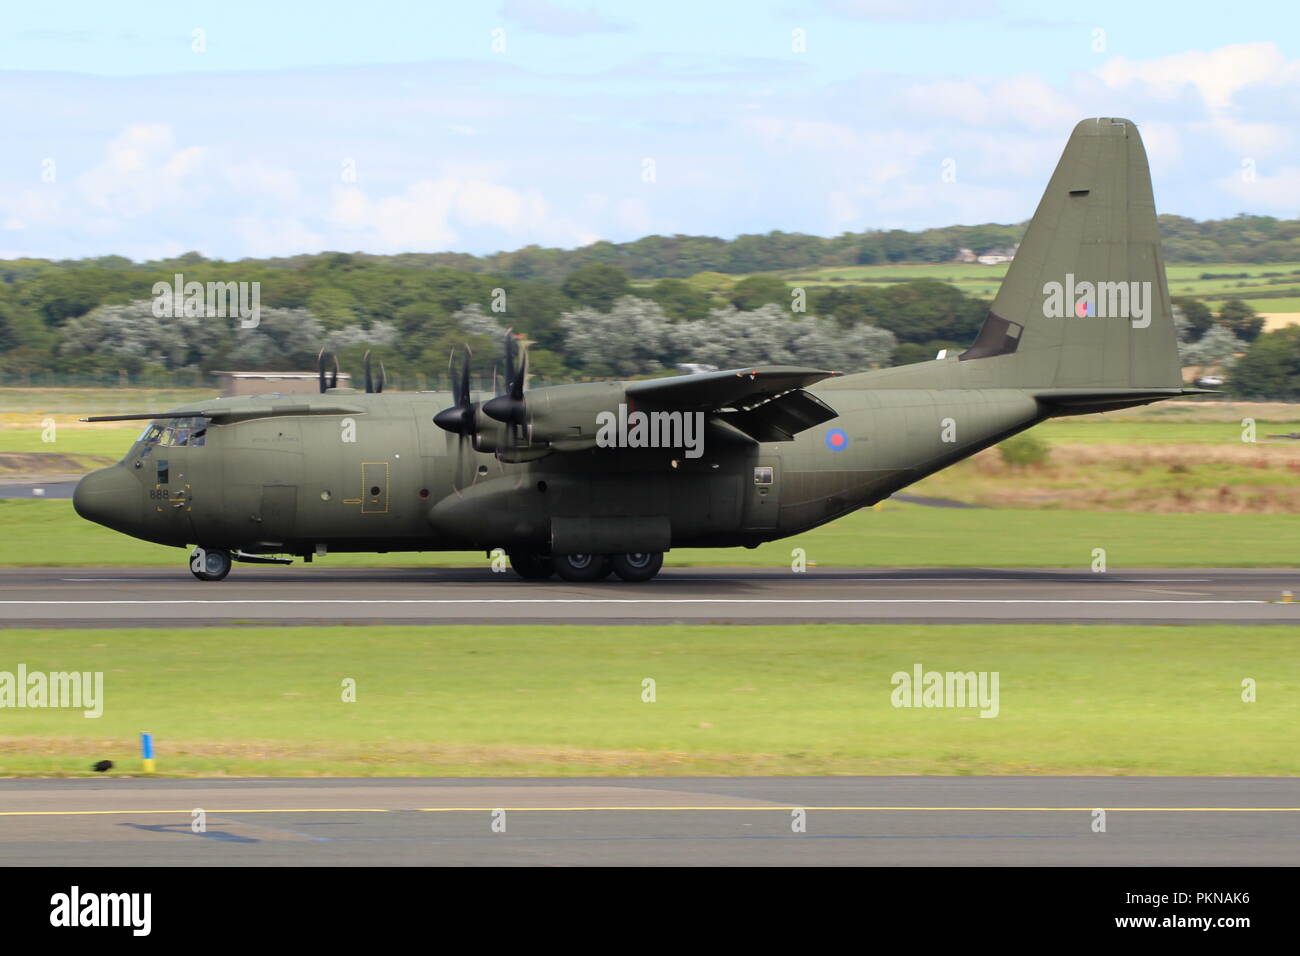 ZH888, a Lockheed Martin C-130J Hercules C5 operated by the Royal Air Force, at Prestwick International Airport in Ayrshire. Stock Photo